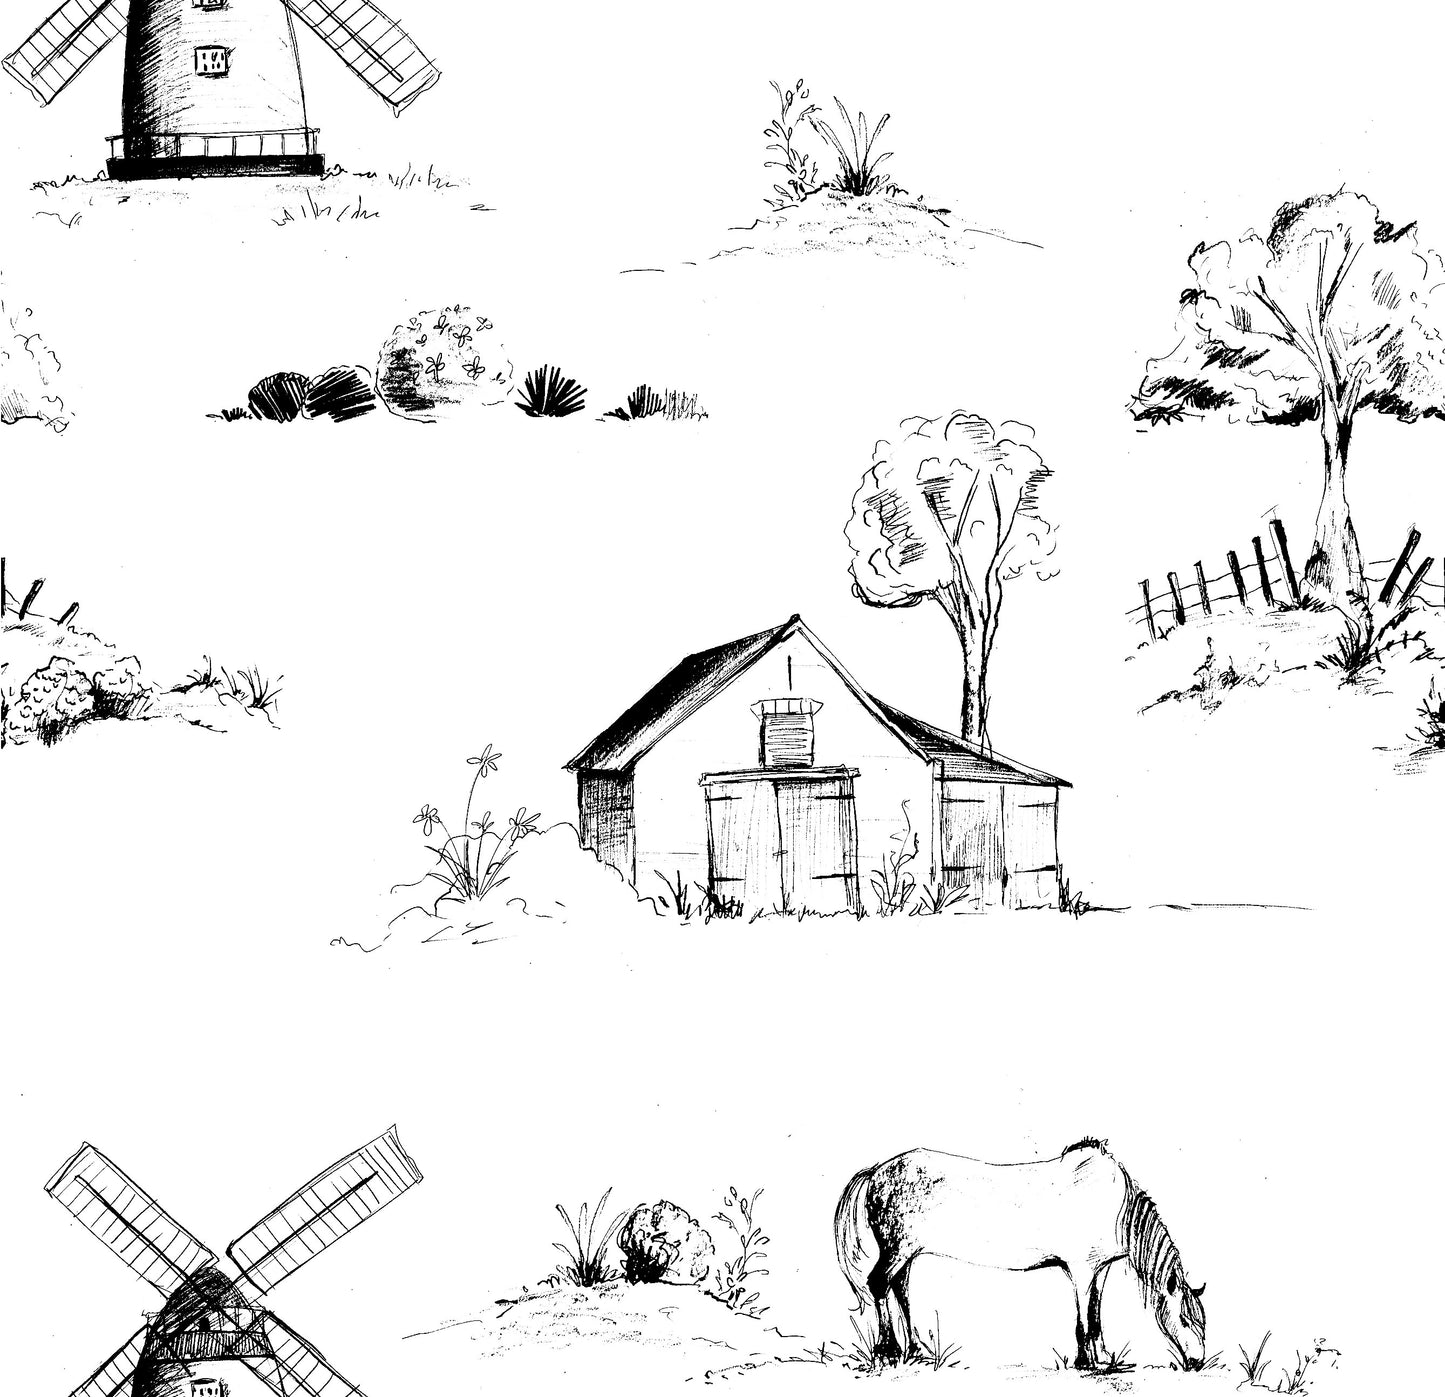 Black barn western farm print on cream background easy to install and remove peel and stick custom wallpaper available in different lengths/sizes locally created and printed in Canada wallpaper. Washable, durable, commercial grade, removable and waterproof.